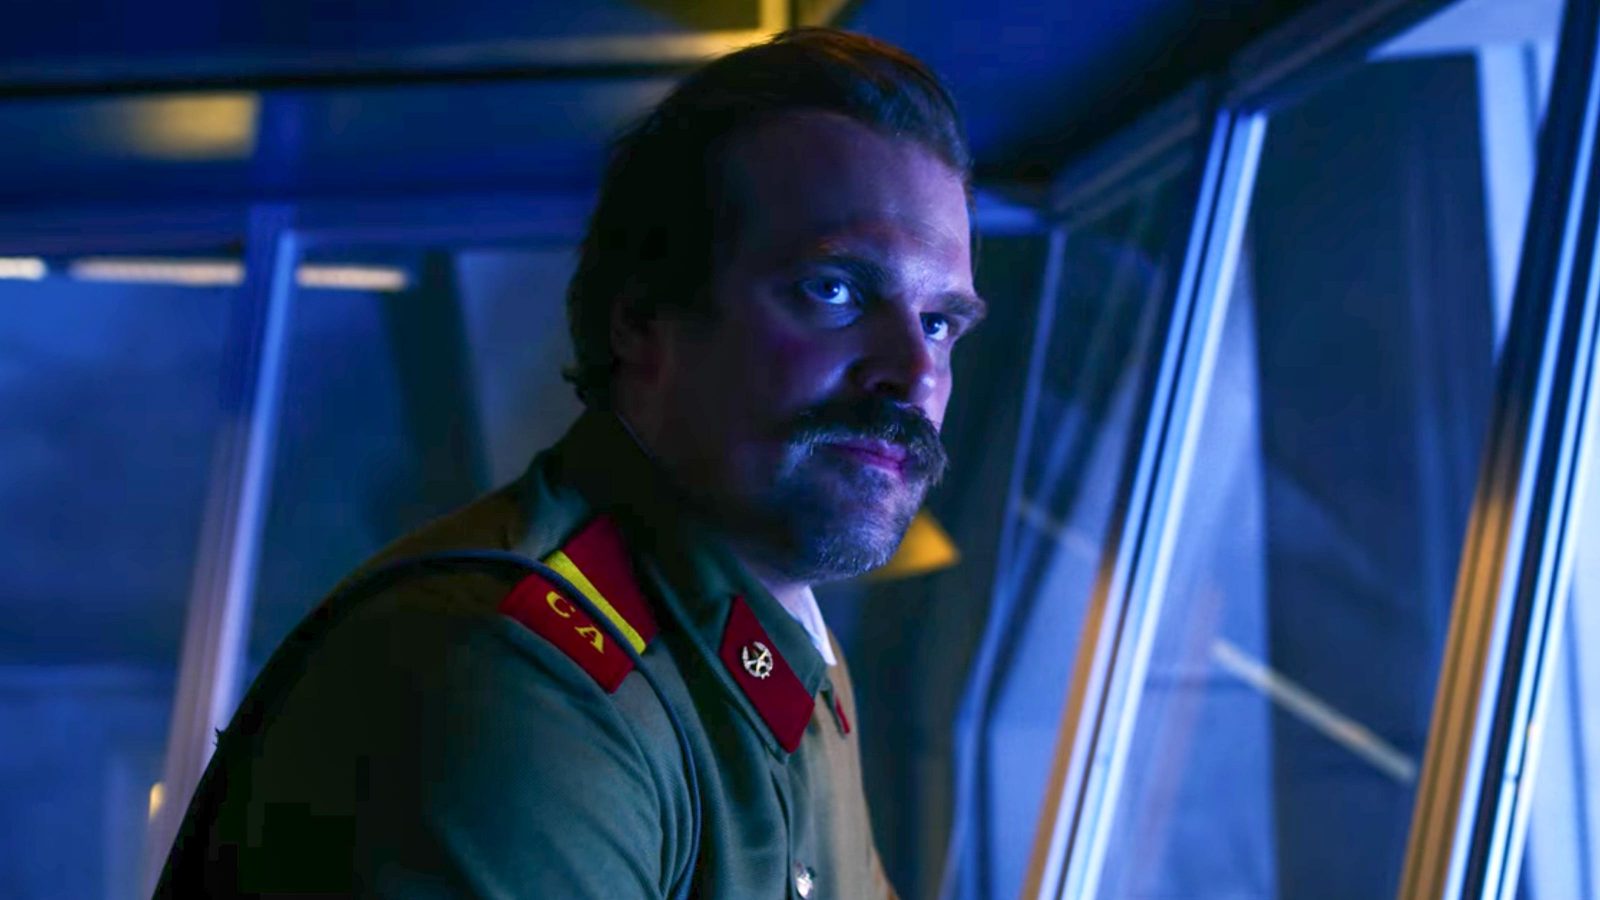 Which Stranger Things Season 3 Character Are You? Hopper Russian 1